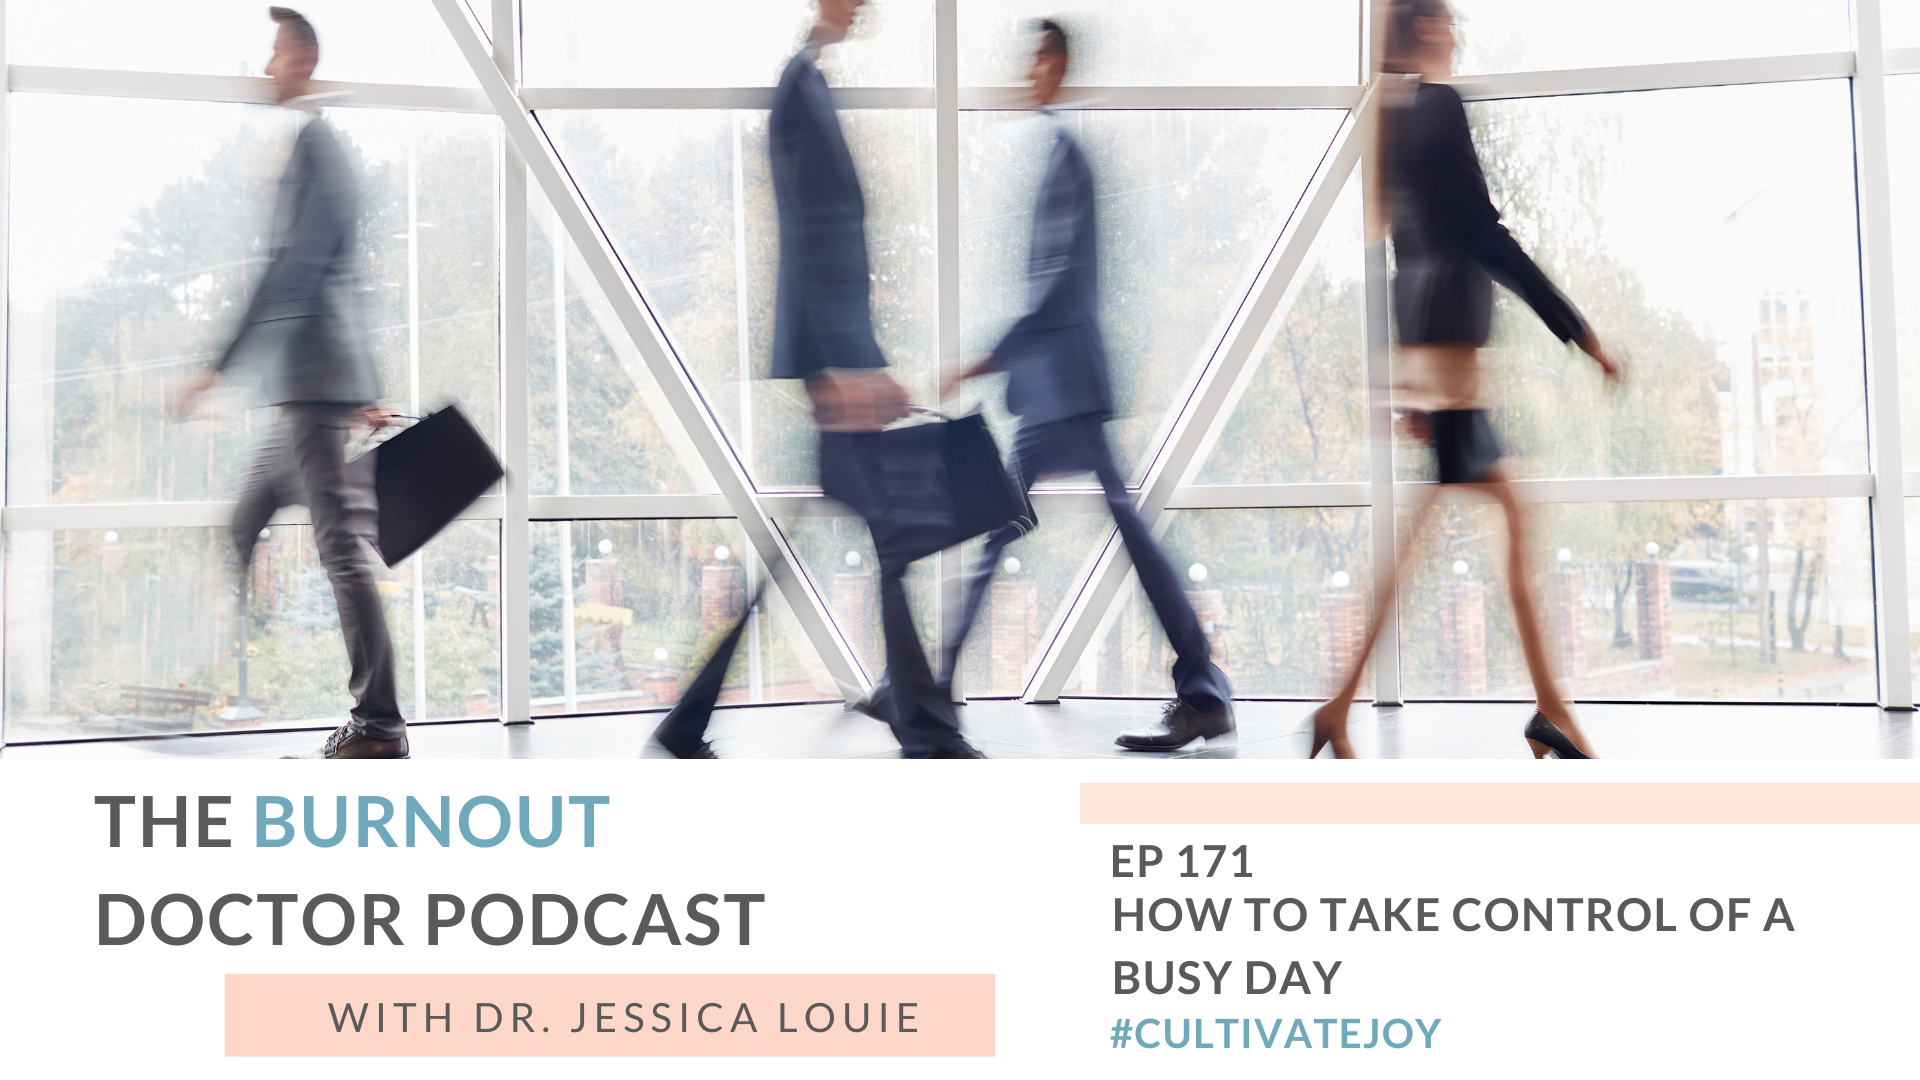 How to take control of a busy work day. how to stop using the word busy in conversations. Pharmacist burnout. The Burnout Doctor Podcast. Dr. Jessica Louie